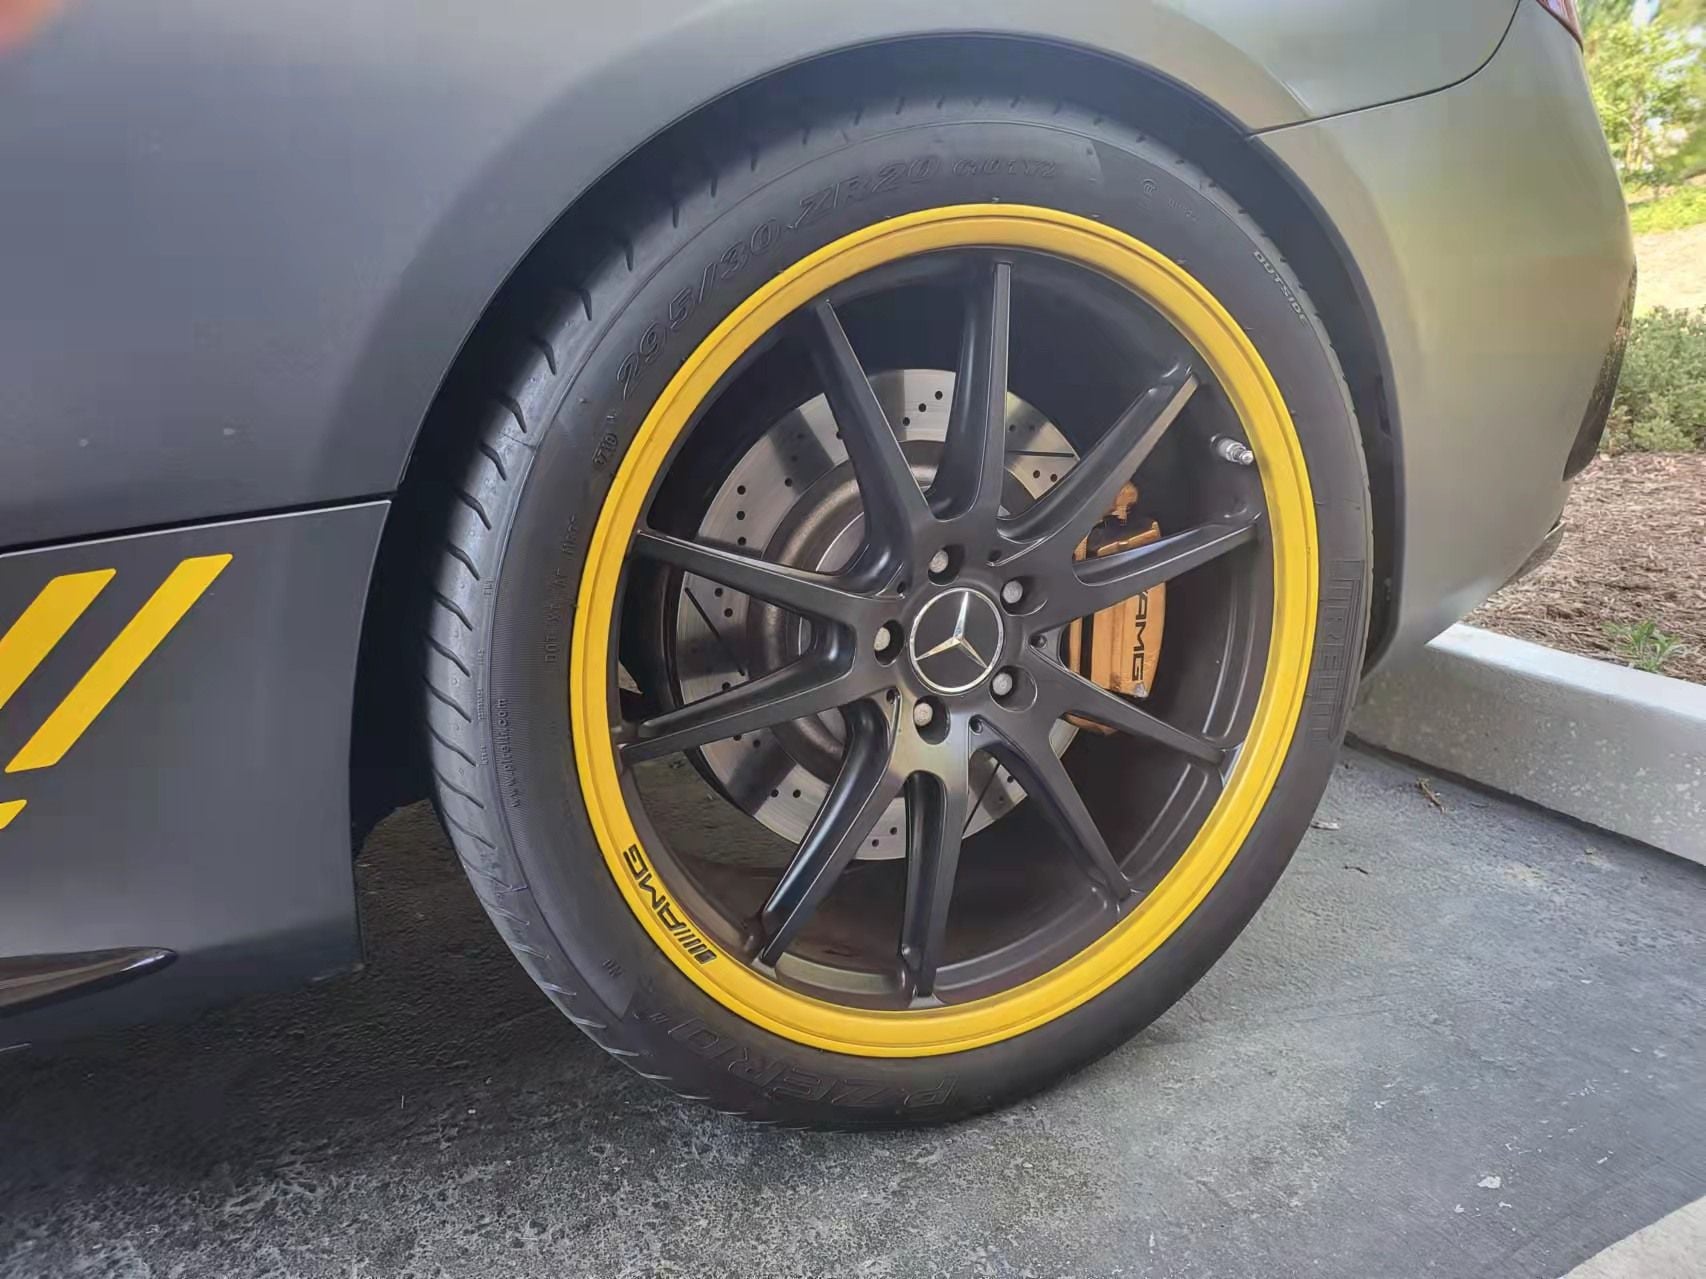 Wheels and Tires/Axles - C63s edition 1 wheels - Used - 2016 to 2021 Mercedes-Benz C63 AMG S - Riverside, CA 92507, United States